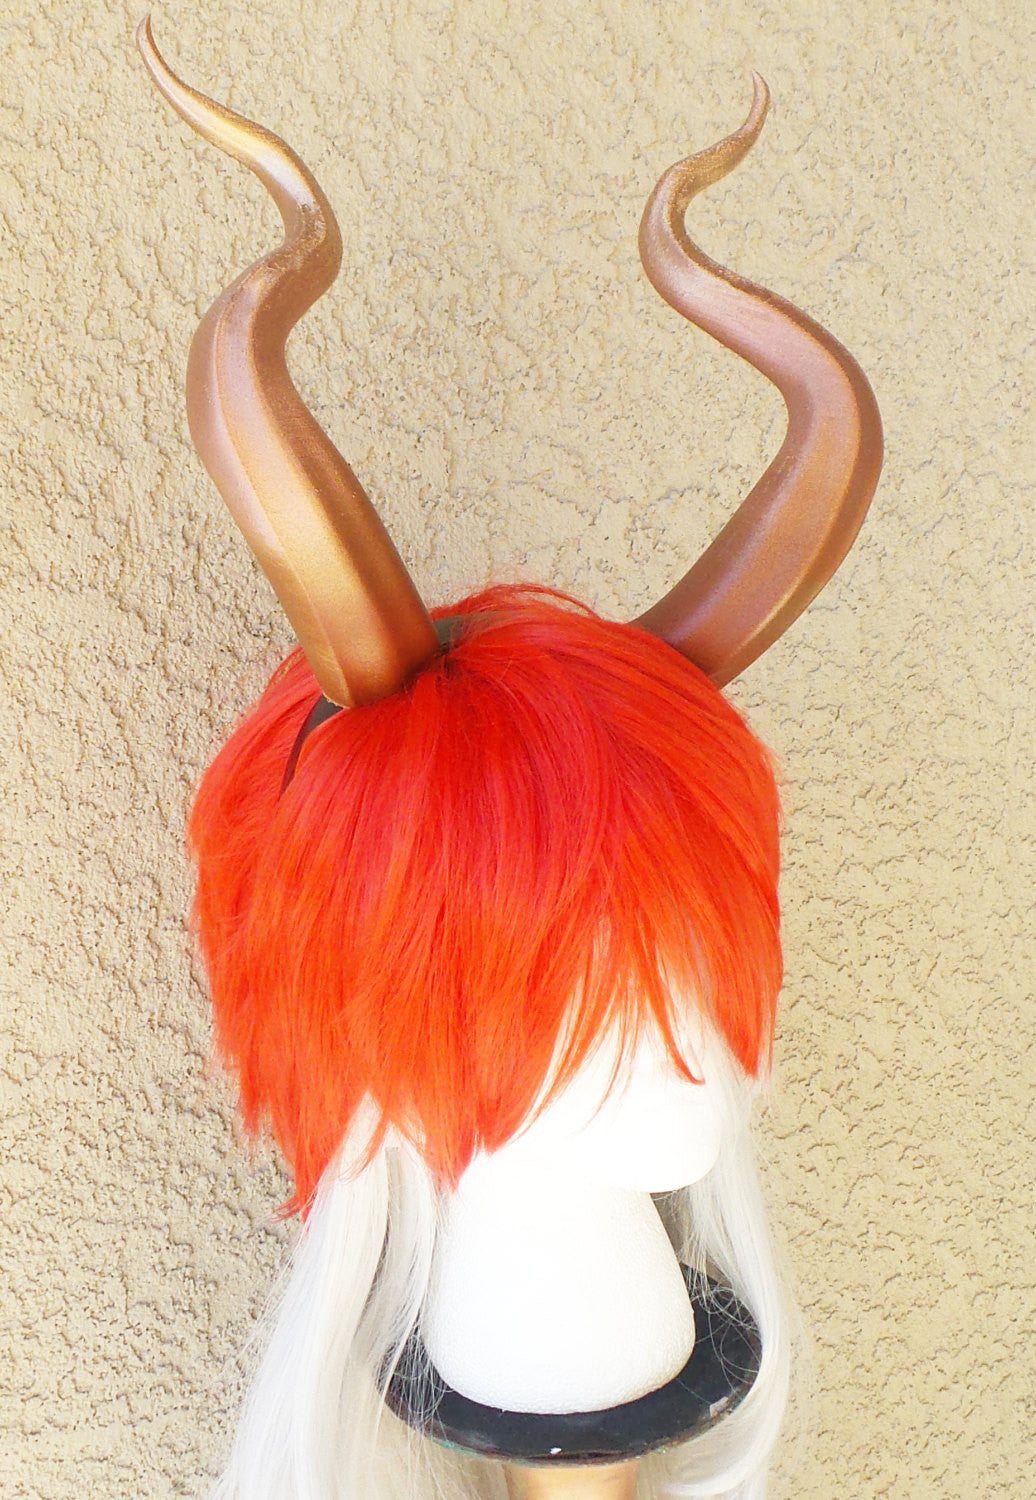 Huge Matador Bull horns 3D printed from PLA(light weight plastic) Coppe-Gold ombre - Mud And Majesty